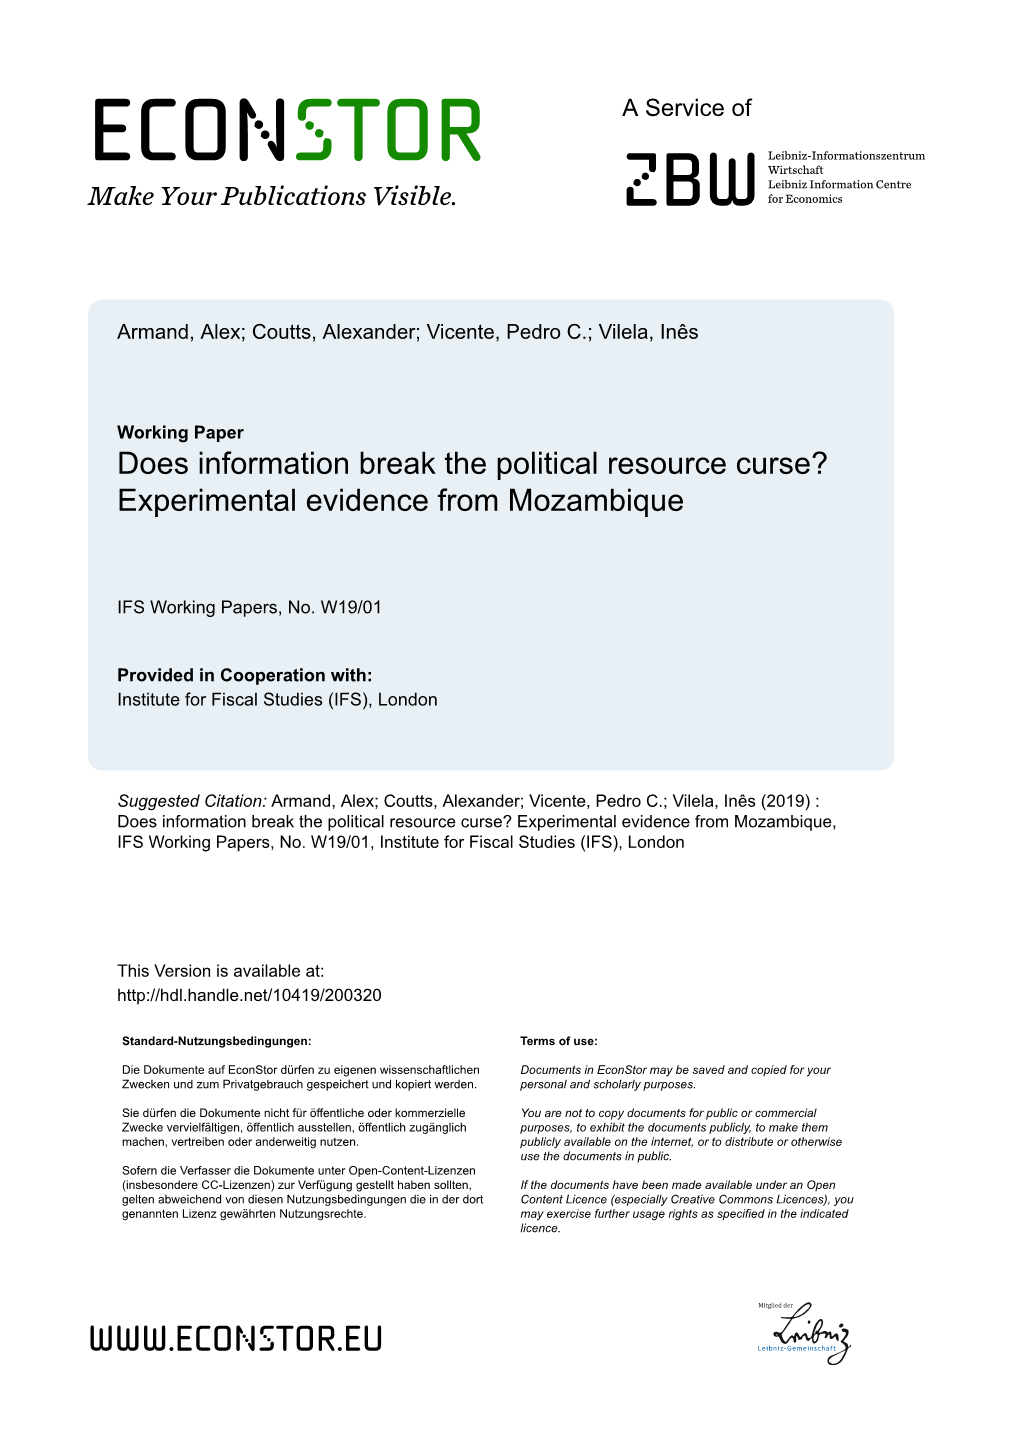 Does Information Break the Political Resource Curse? Experimental Evidence from Mozambique